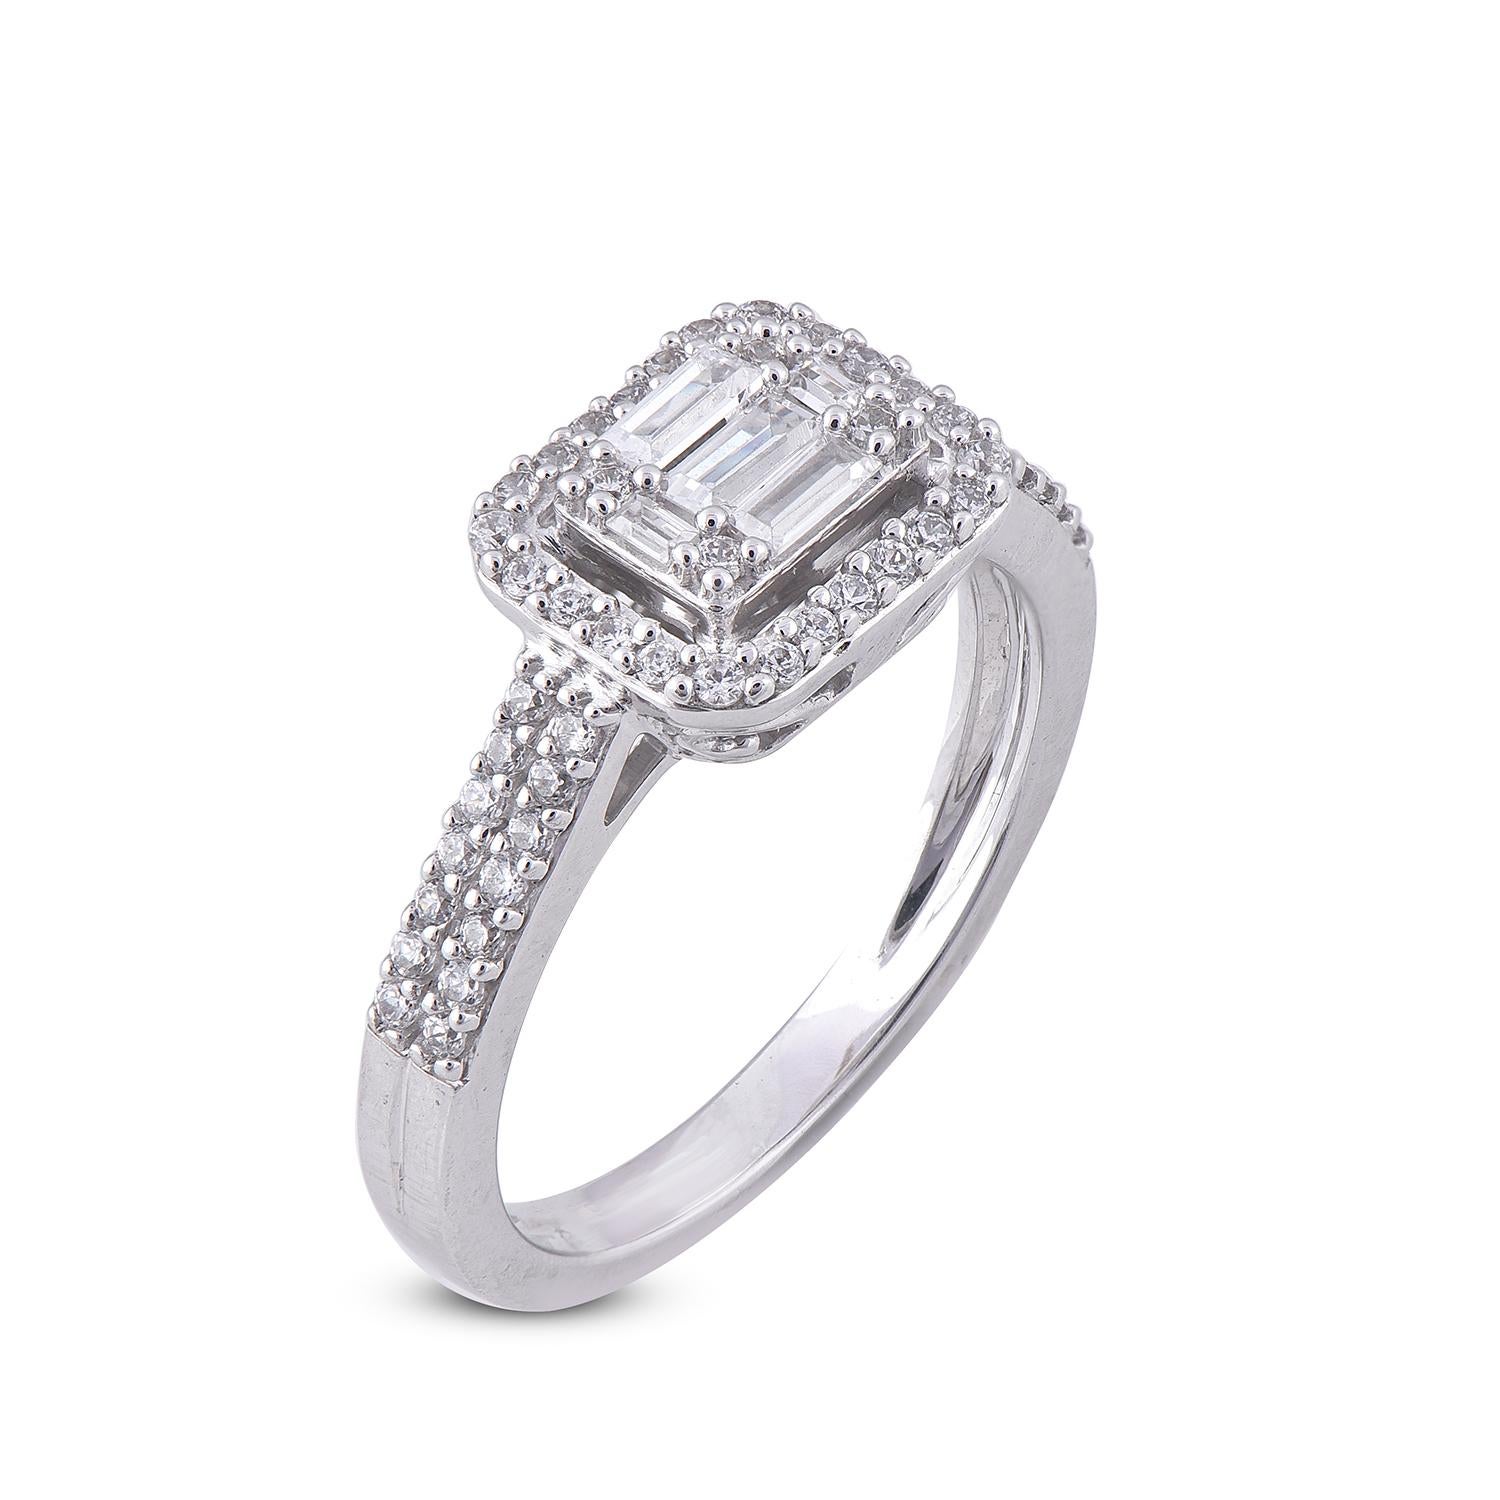 This diamond engagement ring is made in 14 karat White gold and studded beautifully with 56 round diamond and 5 Baguette cut diamond set in prong setting, diamonds are graded H-I Color, I2 Clarity.
